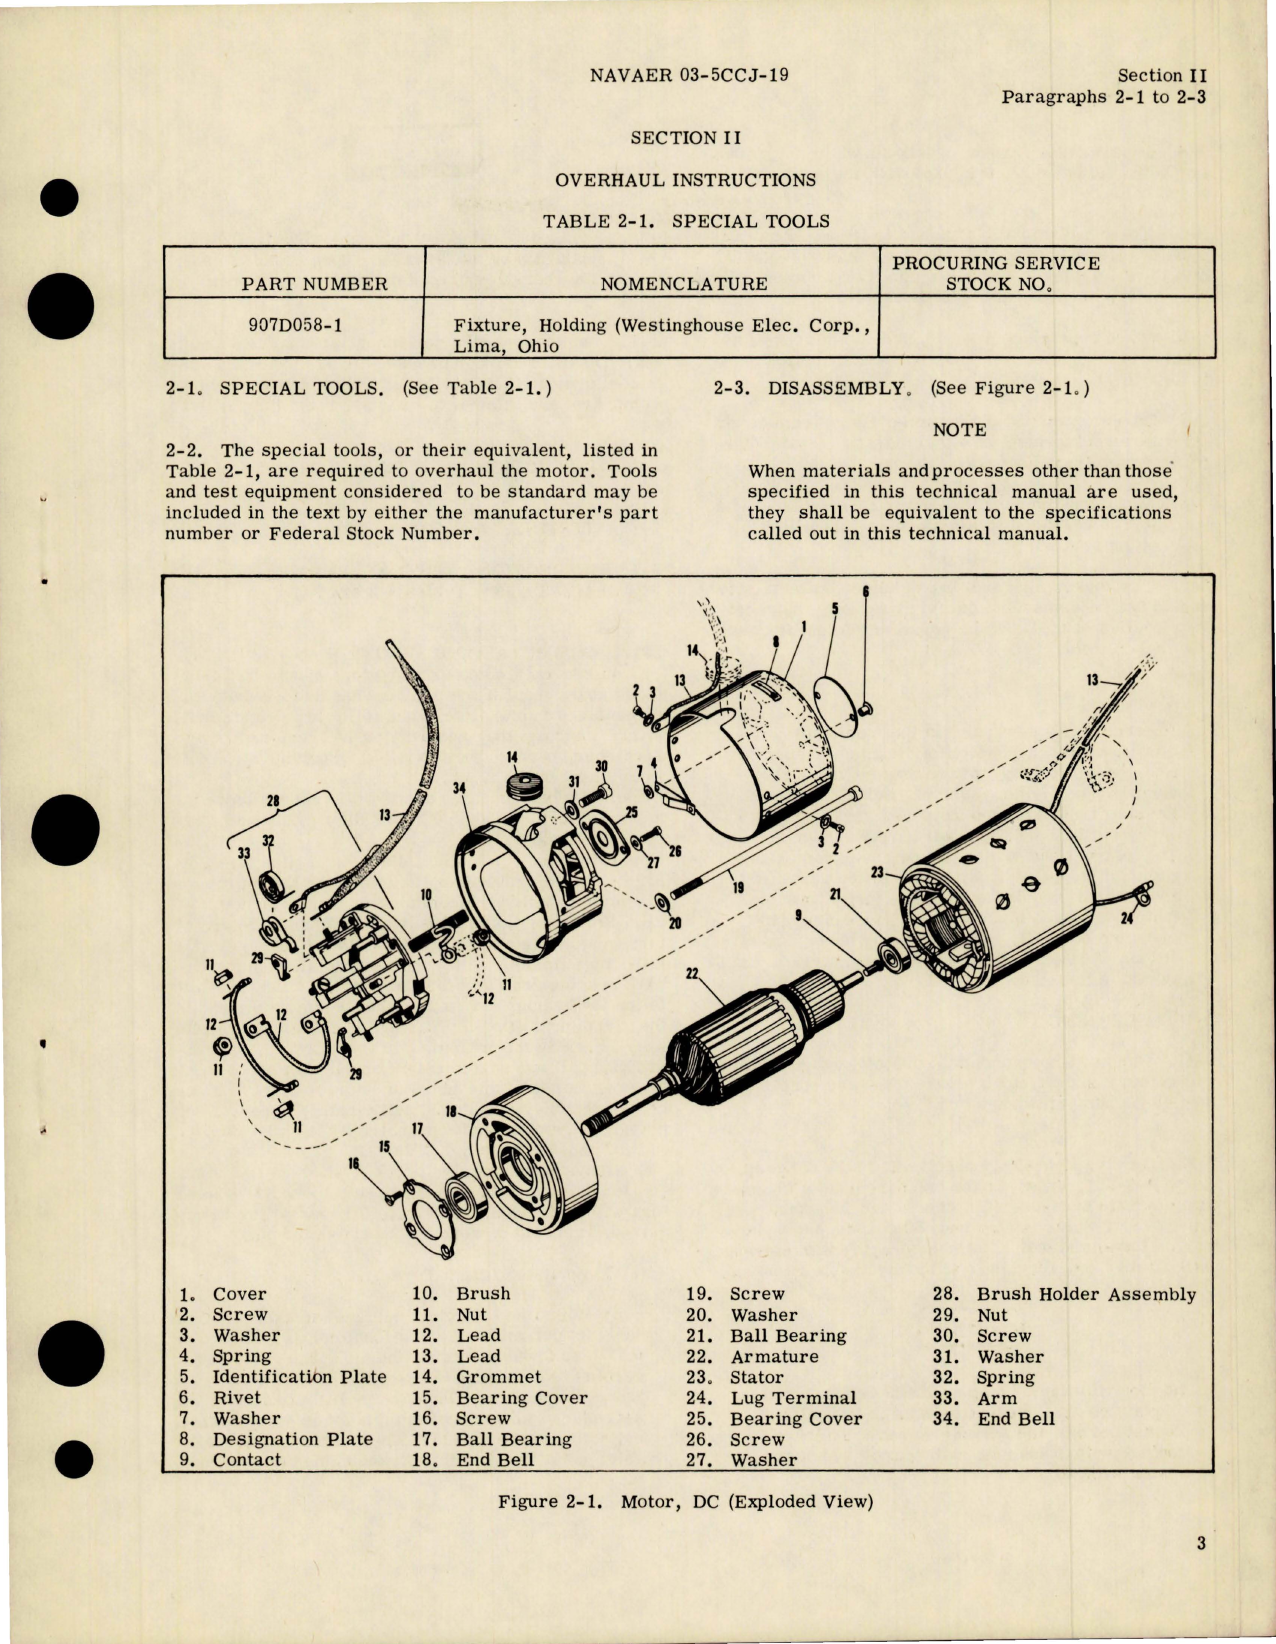 Sample page 7 from AirCorps Library document: Overhaul Instructions for DC Motor - Part 906D068-1 